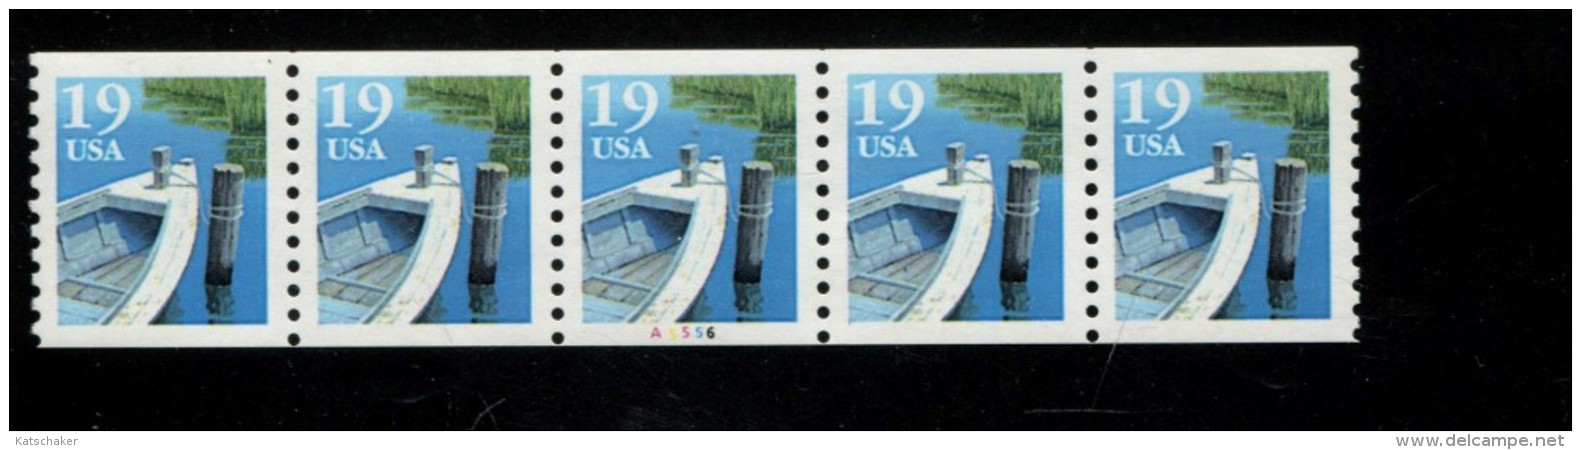 397856551 USA 1993 POSTFRIS MINTNEVER HINGED POSTFRISCH NEUF SCOTT 2529A  2529 A PNC5 A5556 - Coils (Plate Numbers)